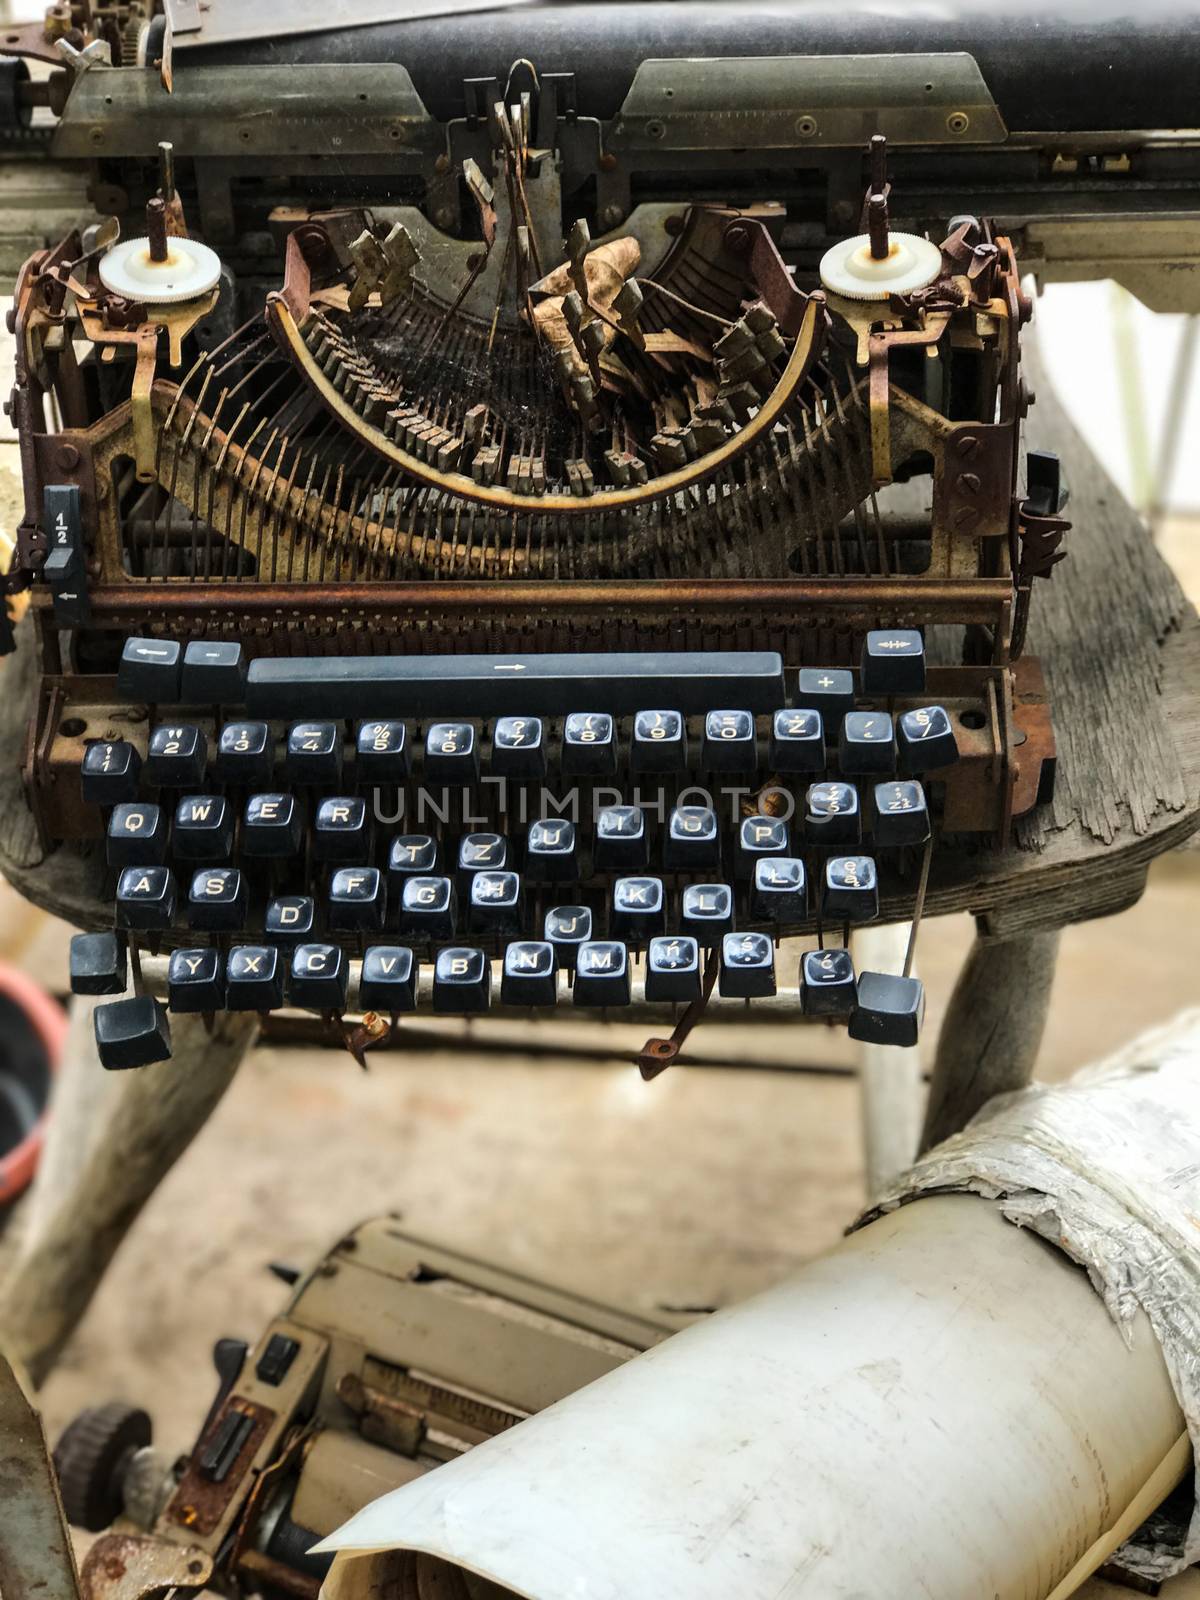 Old retro unnecessary faulty typewriter, professional writer equipment by Softulka